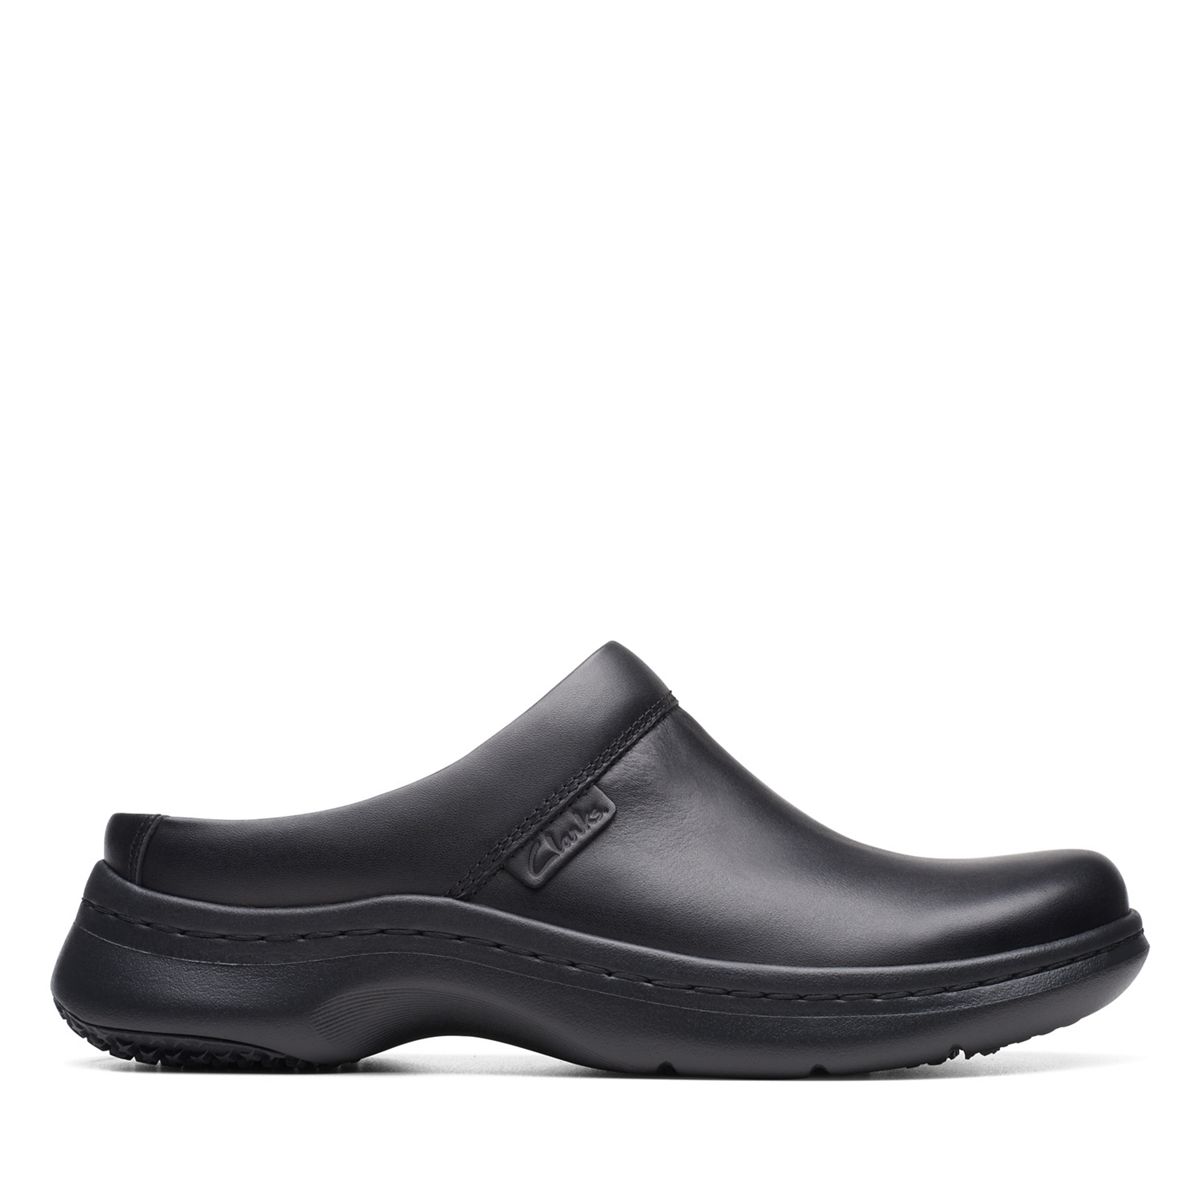 Clarks Pro Clog Leather - Clarks Canada Official Site | Clarks Shoes